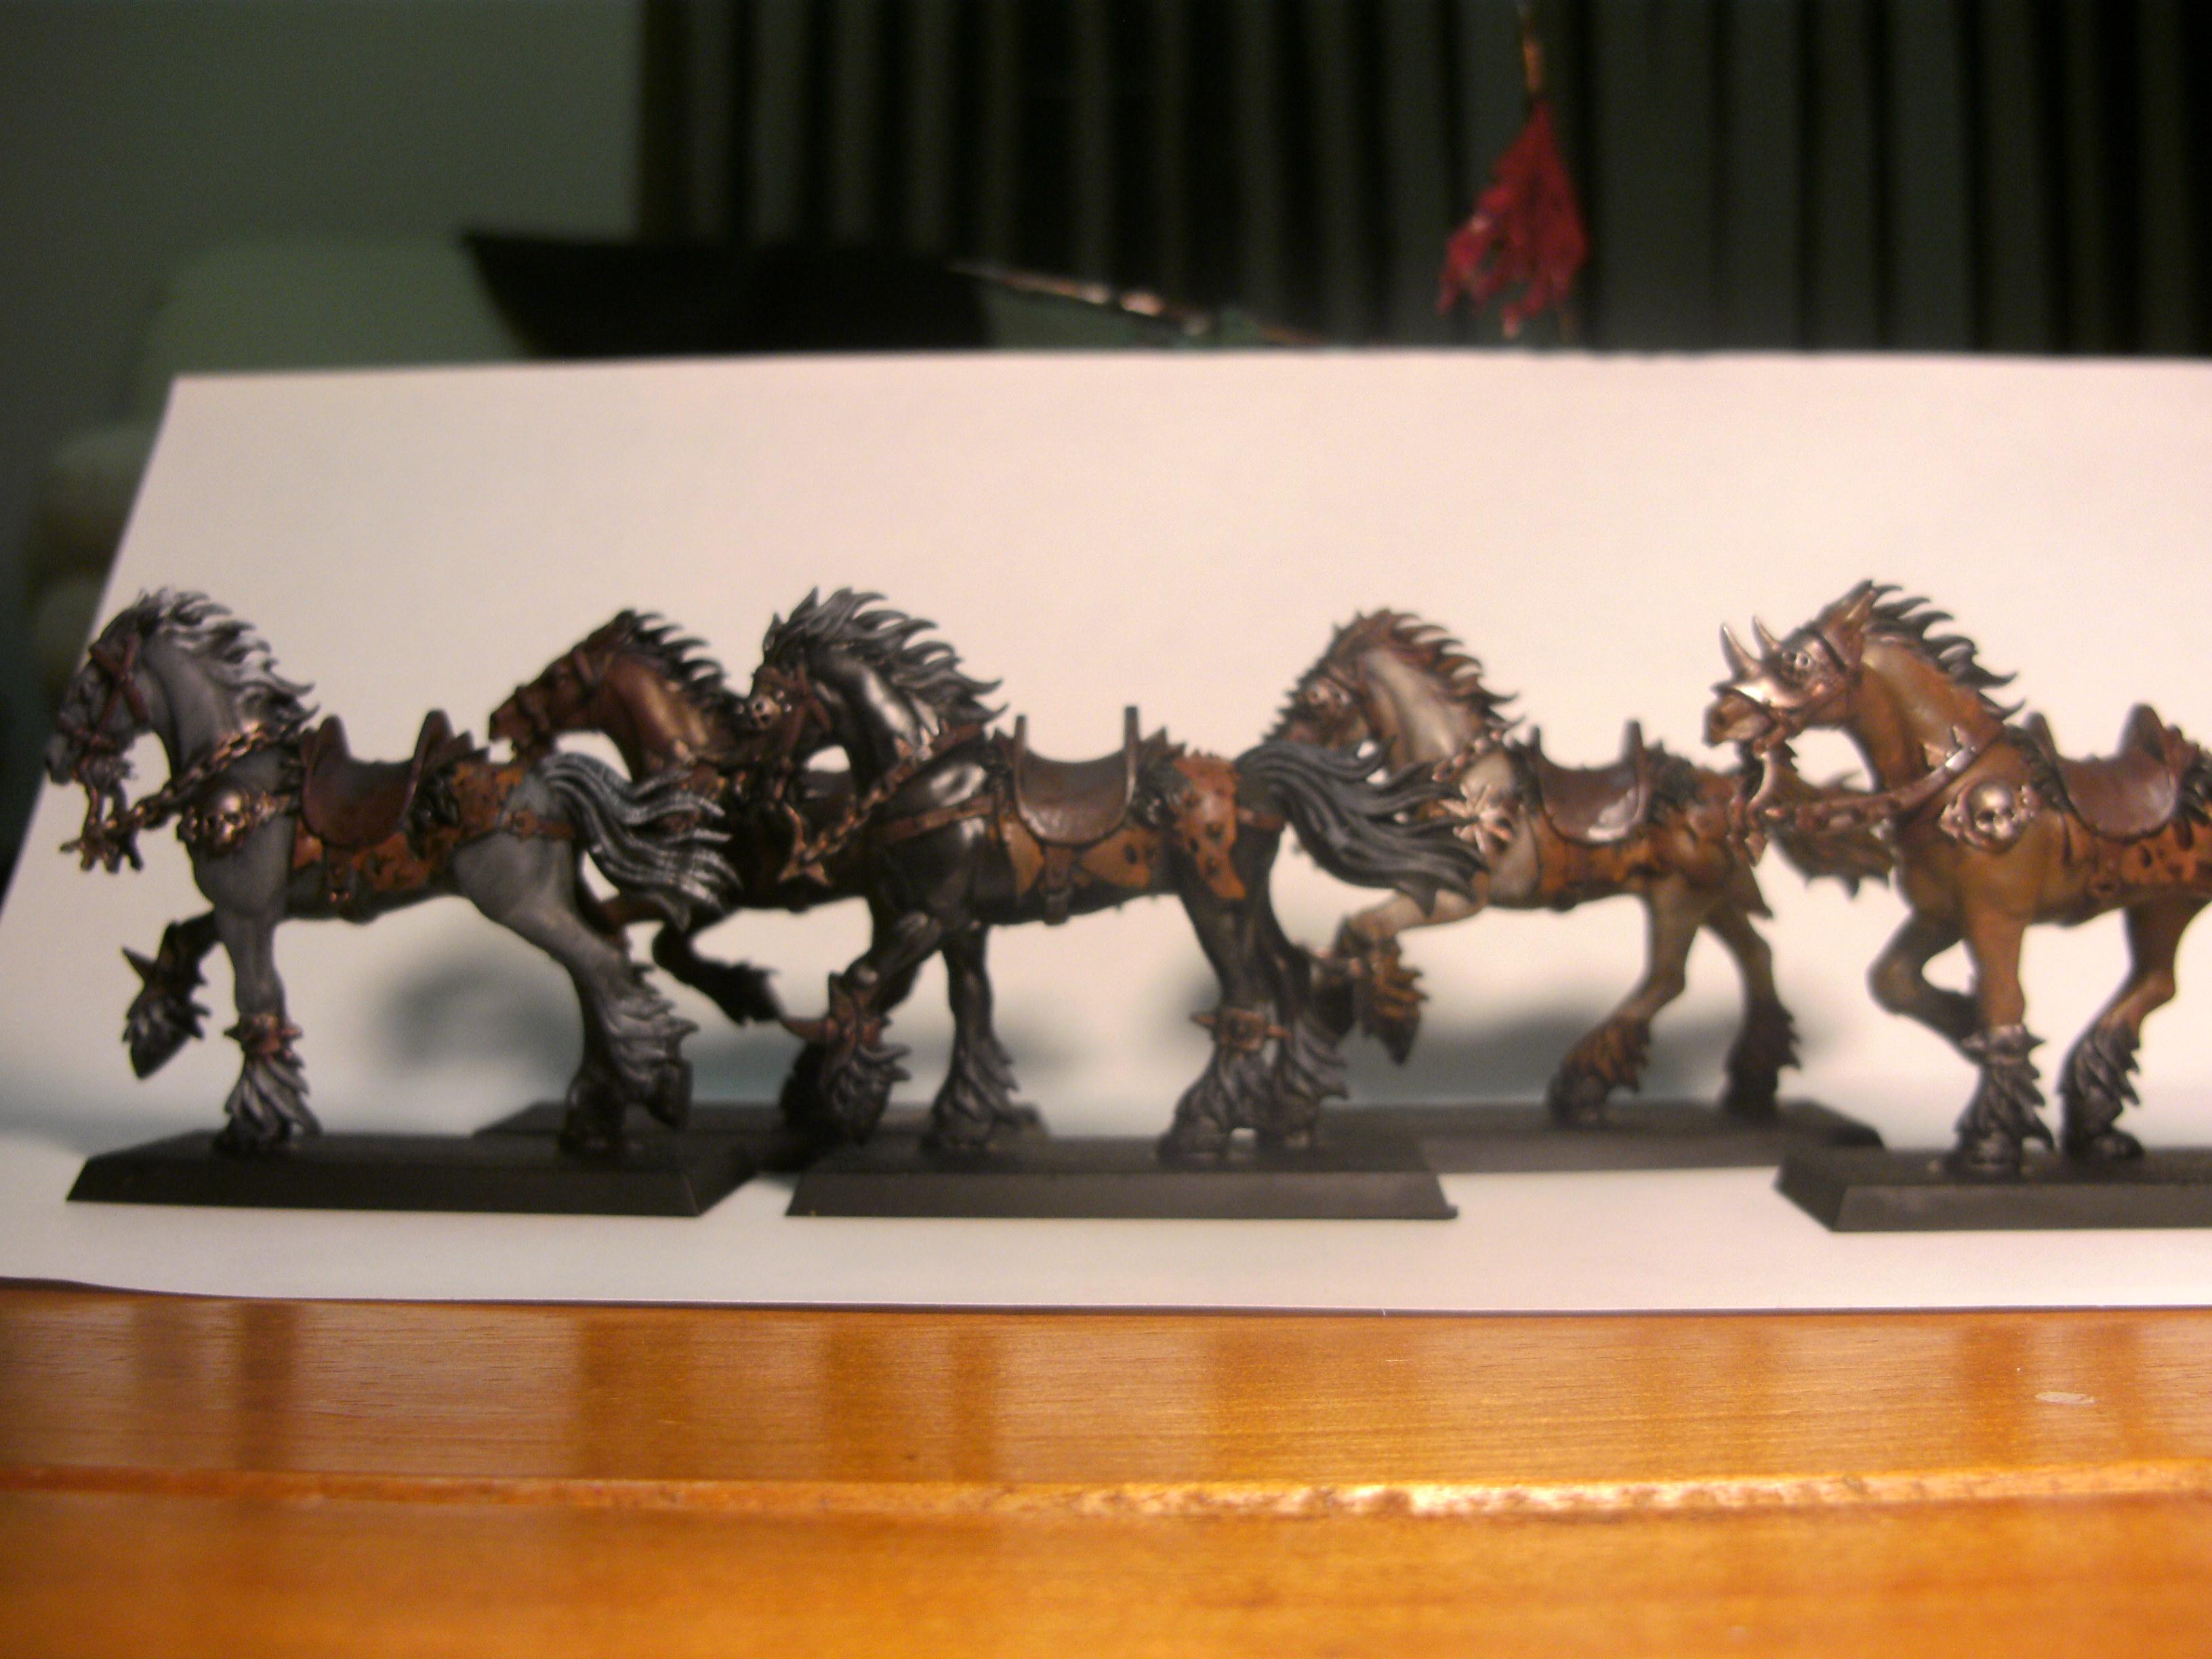 Marauder Horsies from the side